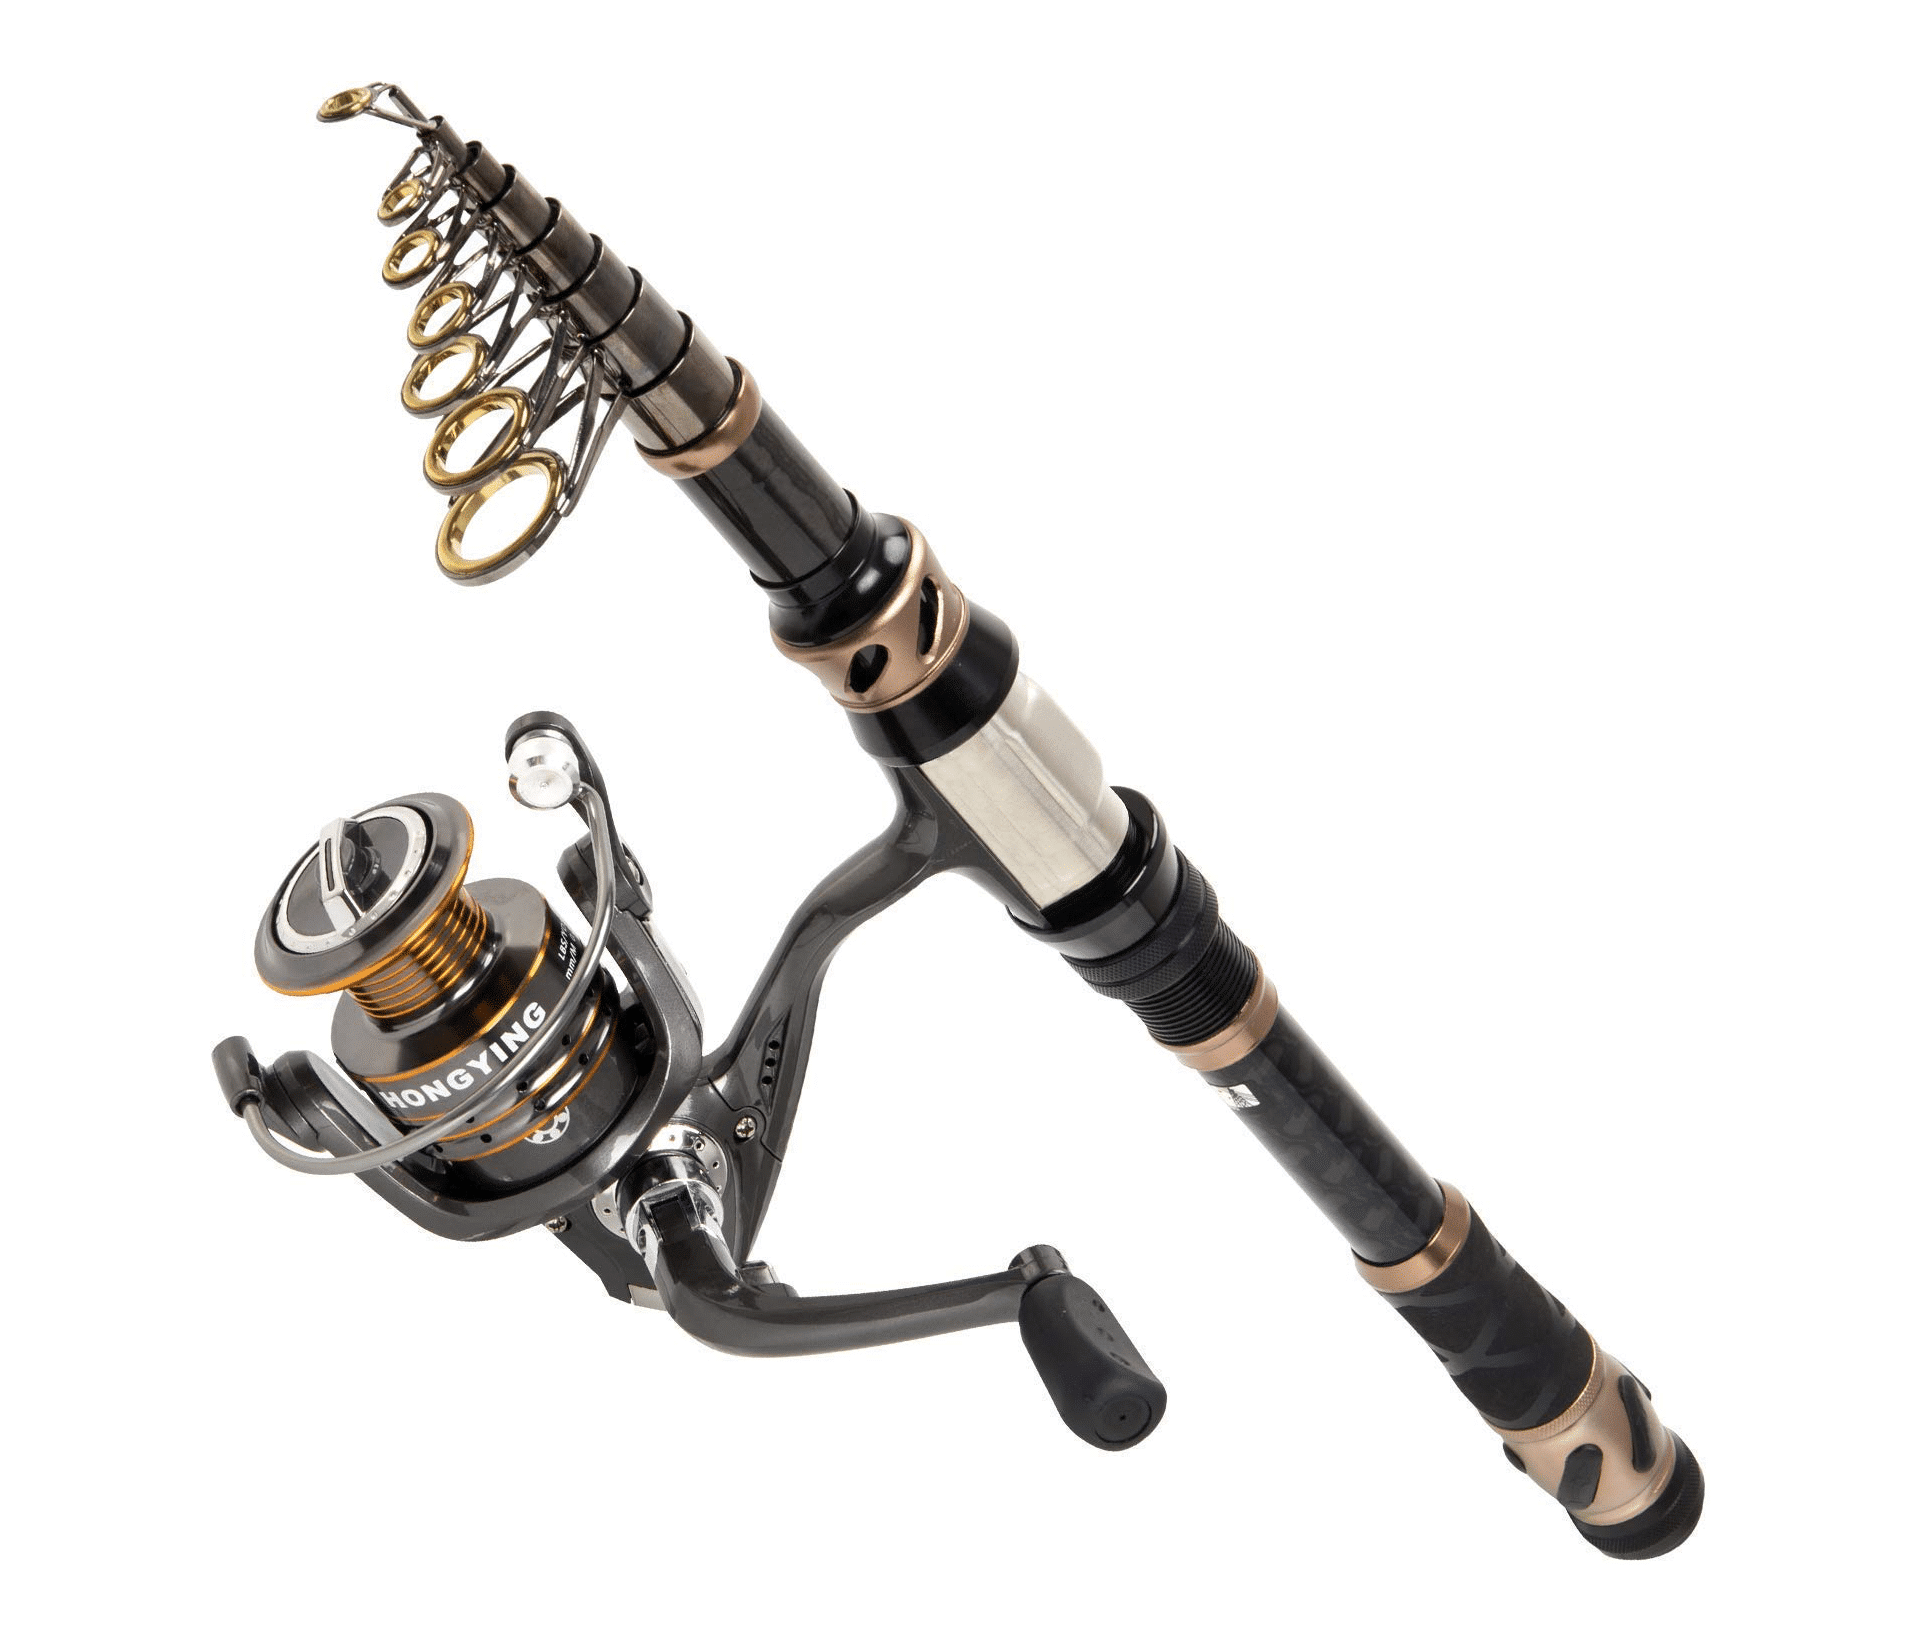 Plusinno Rod & Reel Combo 2019 [Updated] Review